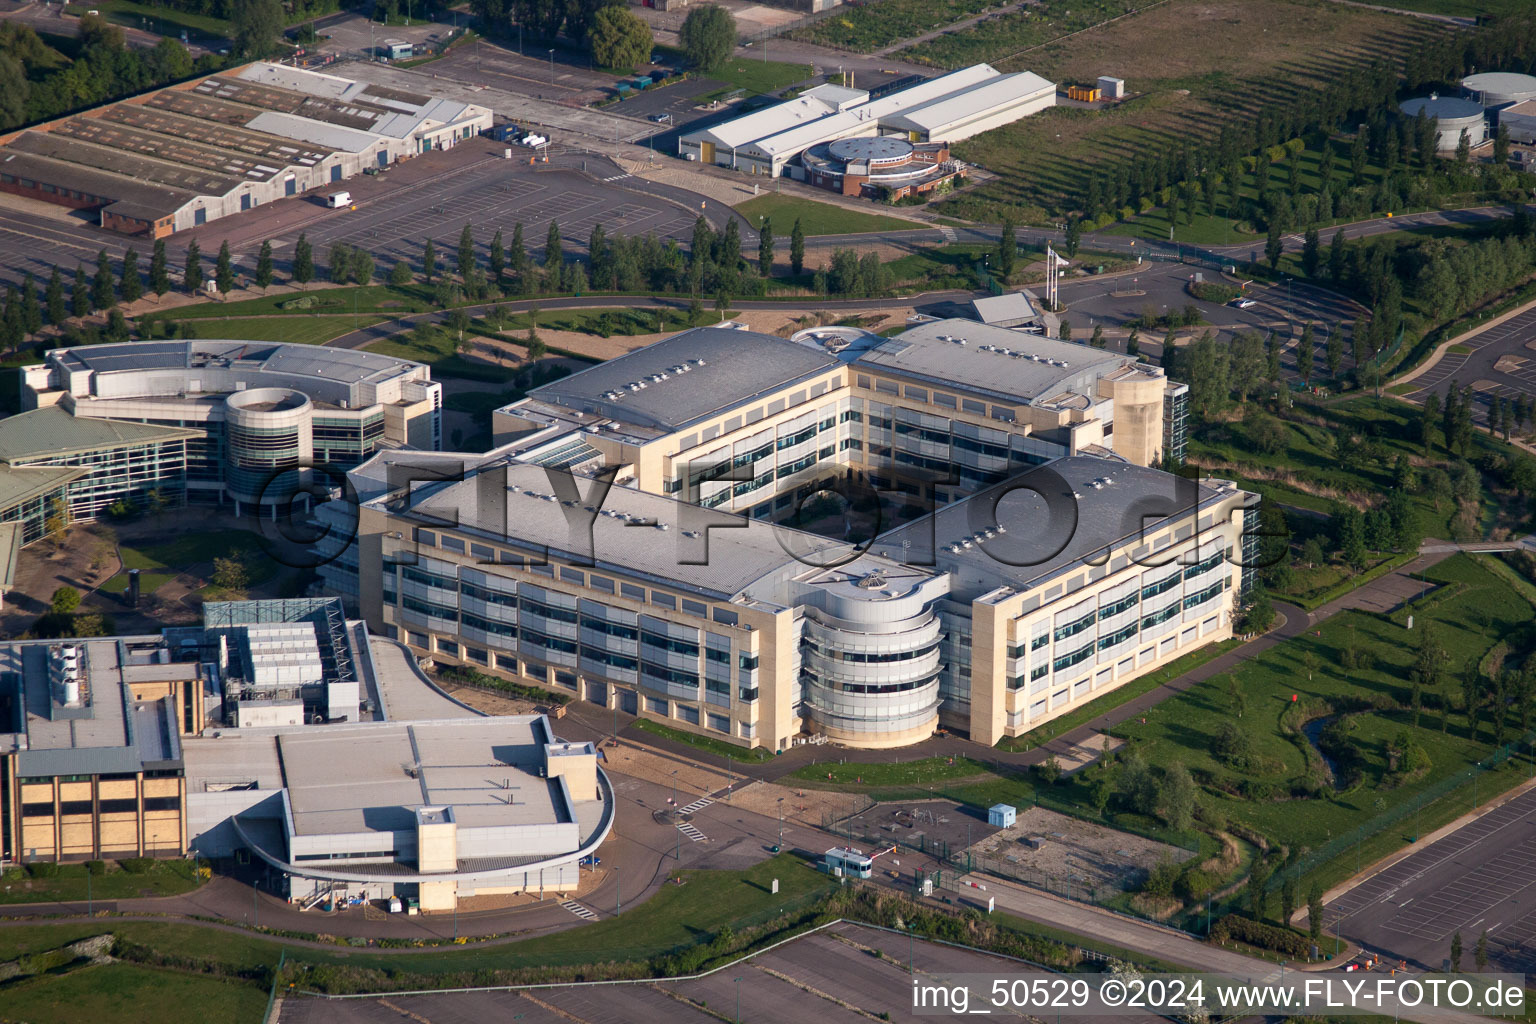 Building and production halls on the premises of the chemical manufacturers Pfizer Ltd and Discovery Park in Sandwich in England, United Kingdom out of the air